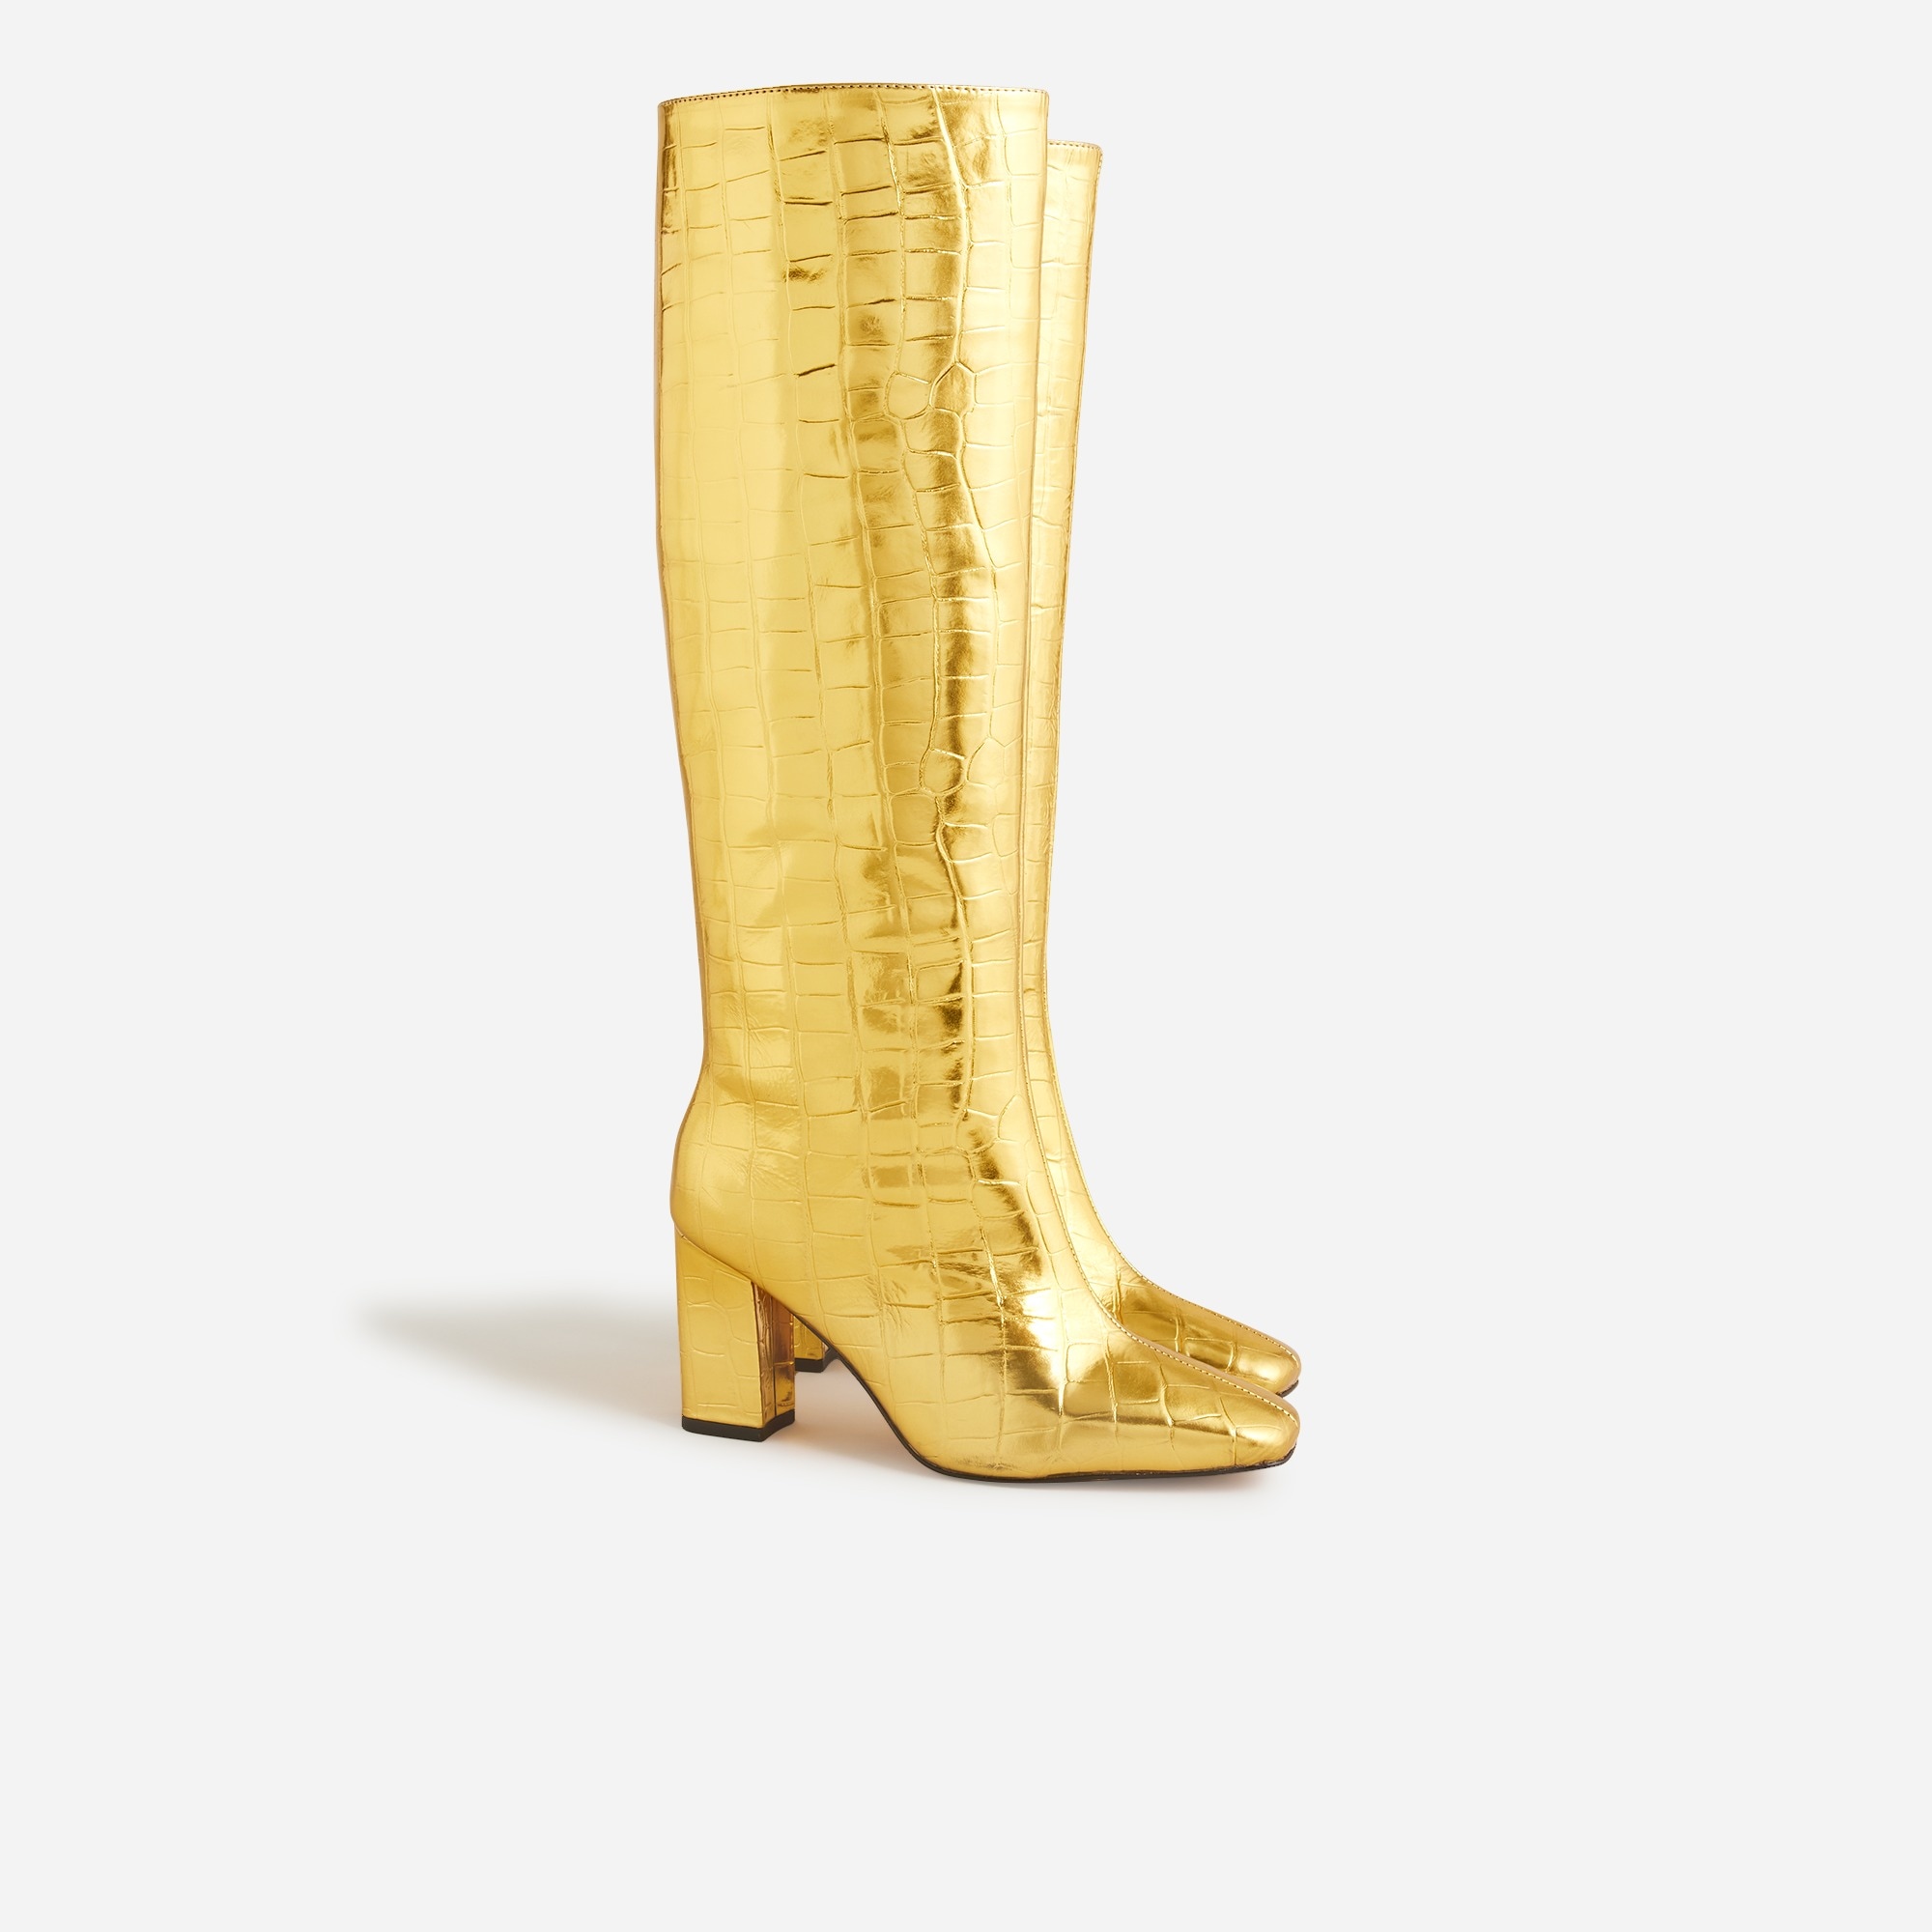  Collection limited-edition knee-high boots in croc-embossed metallic leather